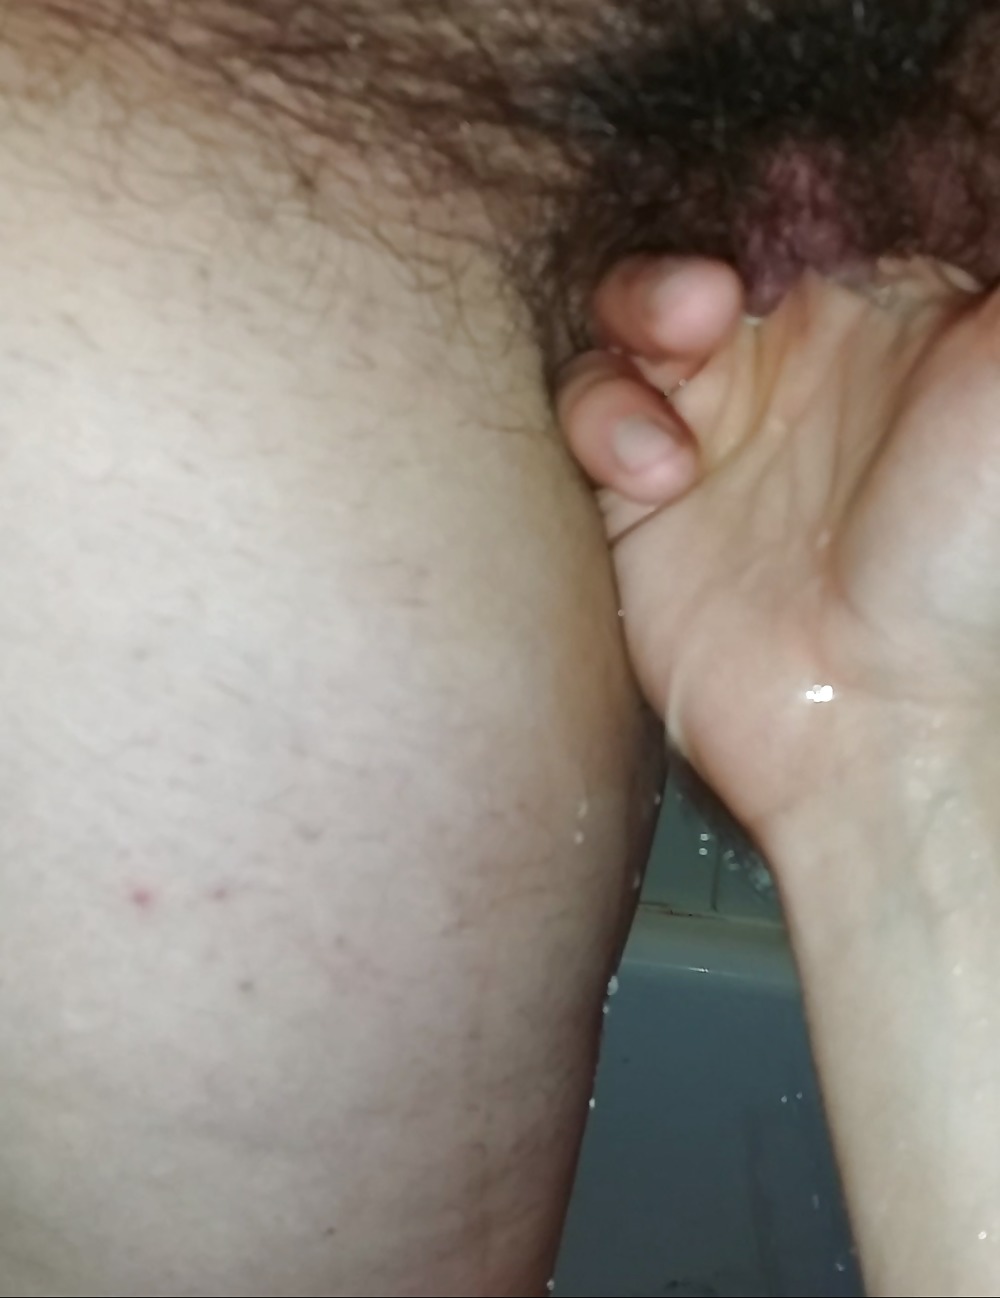 Fingering Hairy Pussy For Squirt #107316272